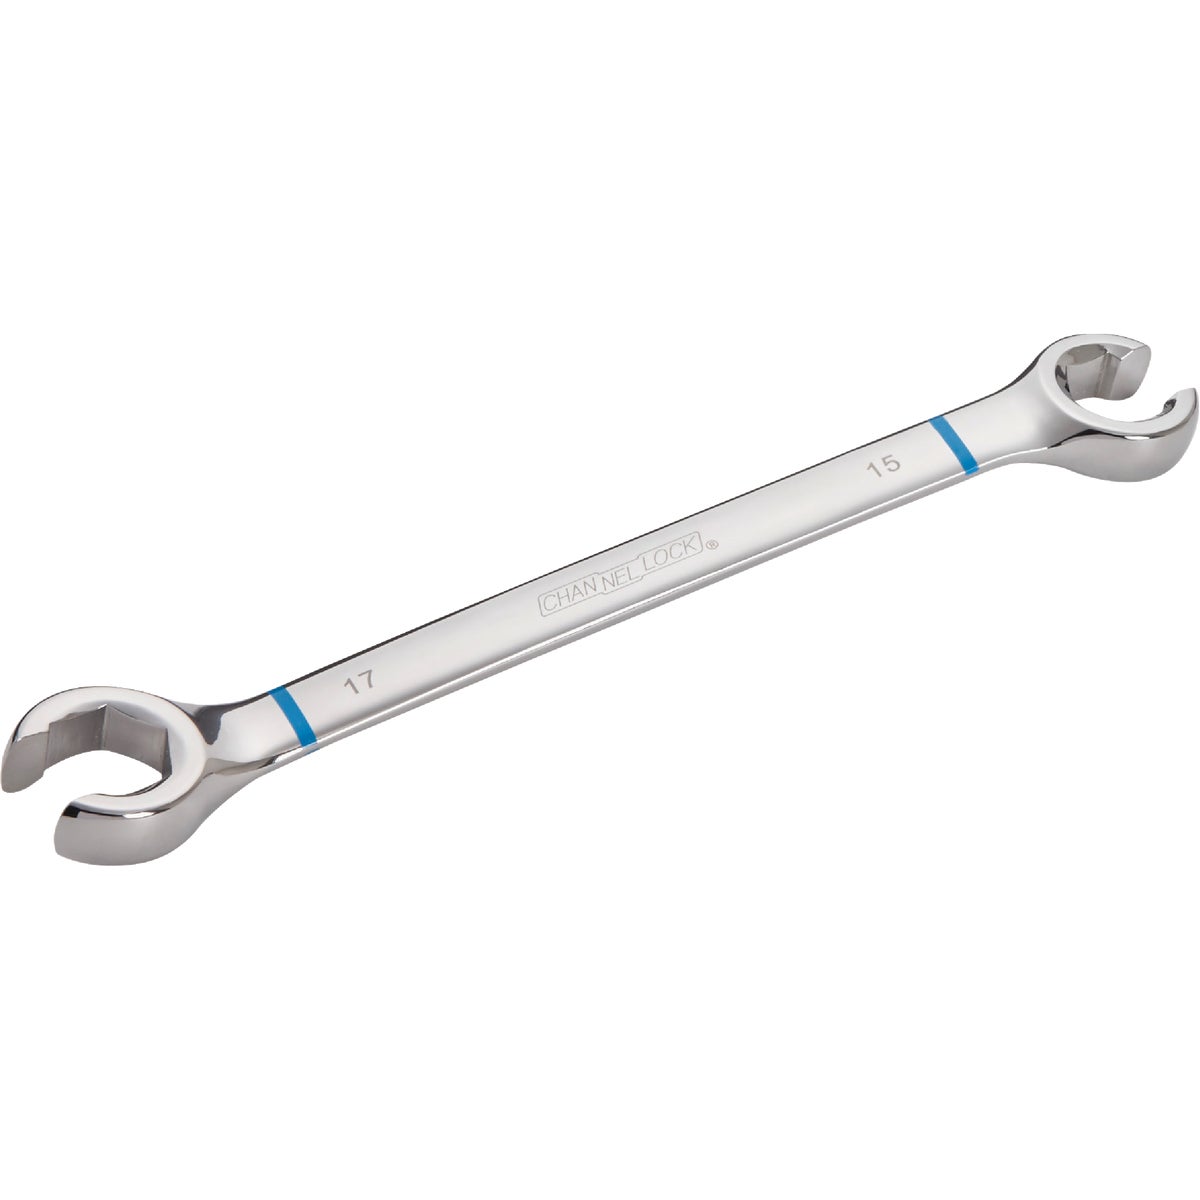 Channellock Metric 15 mm x 17 mm 6-Point Flare Nut Wrench